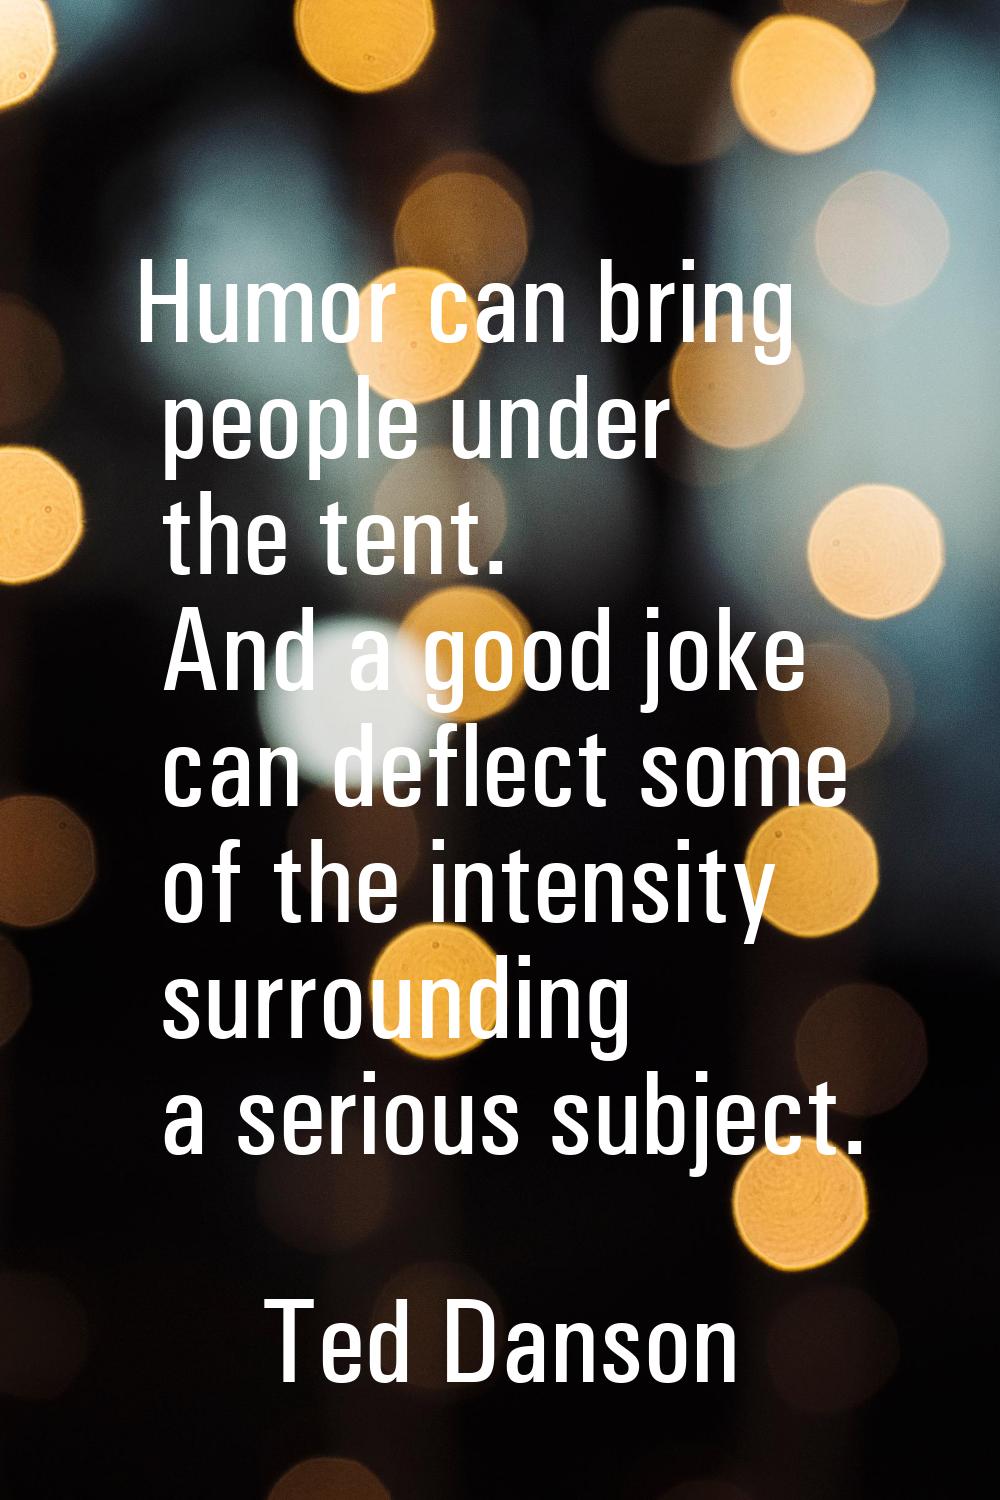 Humor can bring people under the tent. And a good joke can deflect some of the intensity surroundin